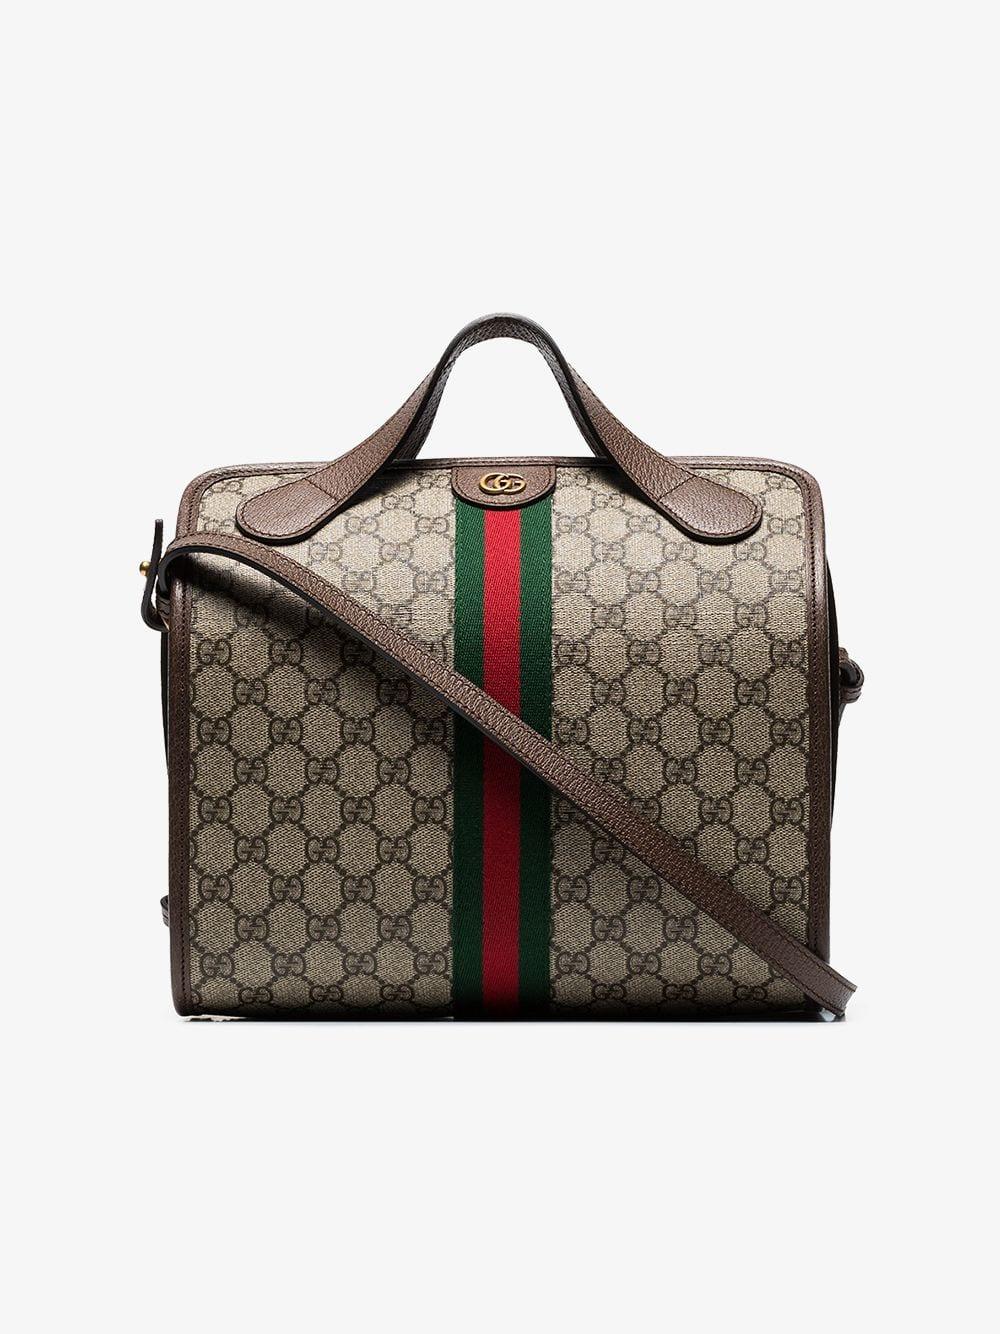 Lyst - Gucci Beige And Brown Supreme Ophidia Mini Duffle Bag Tote in Brown